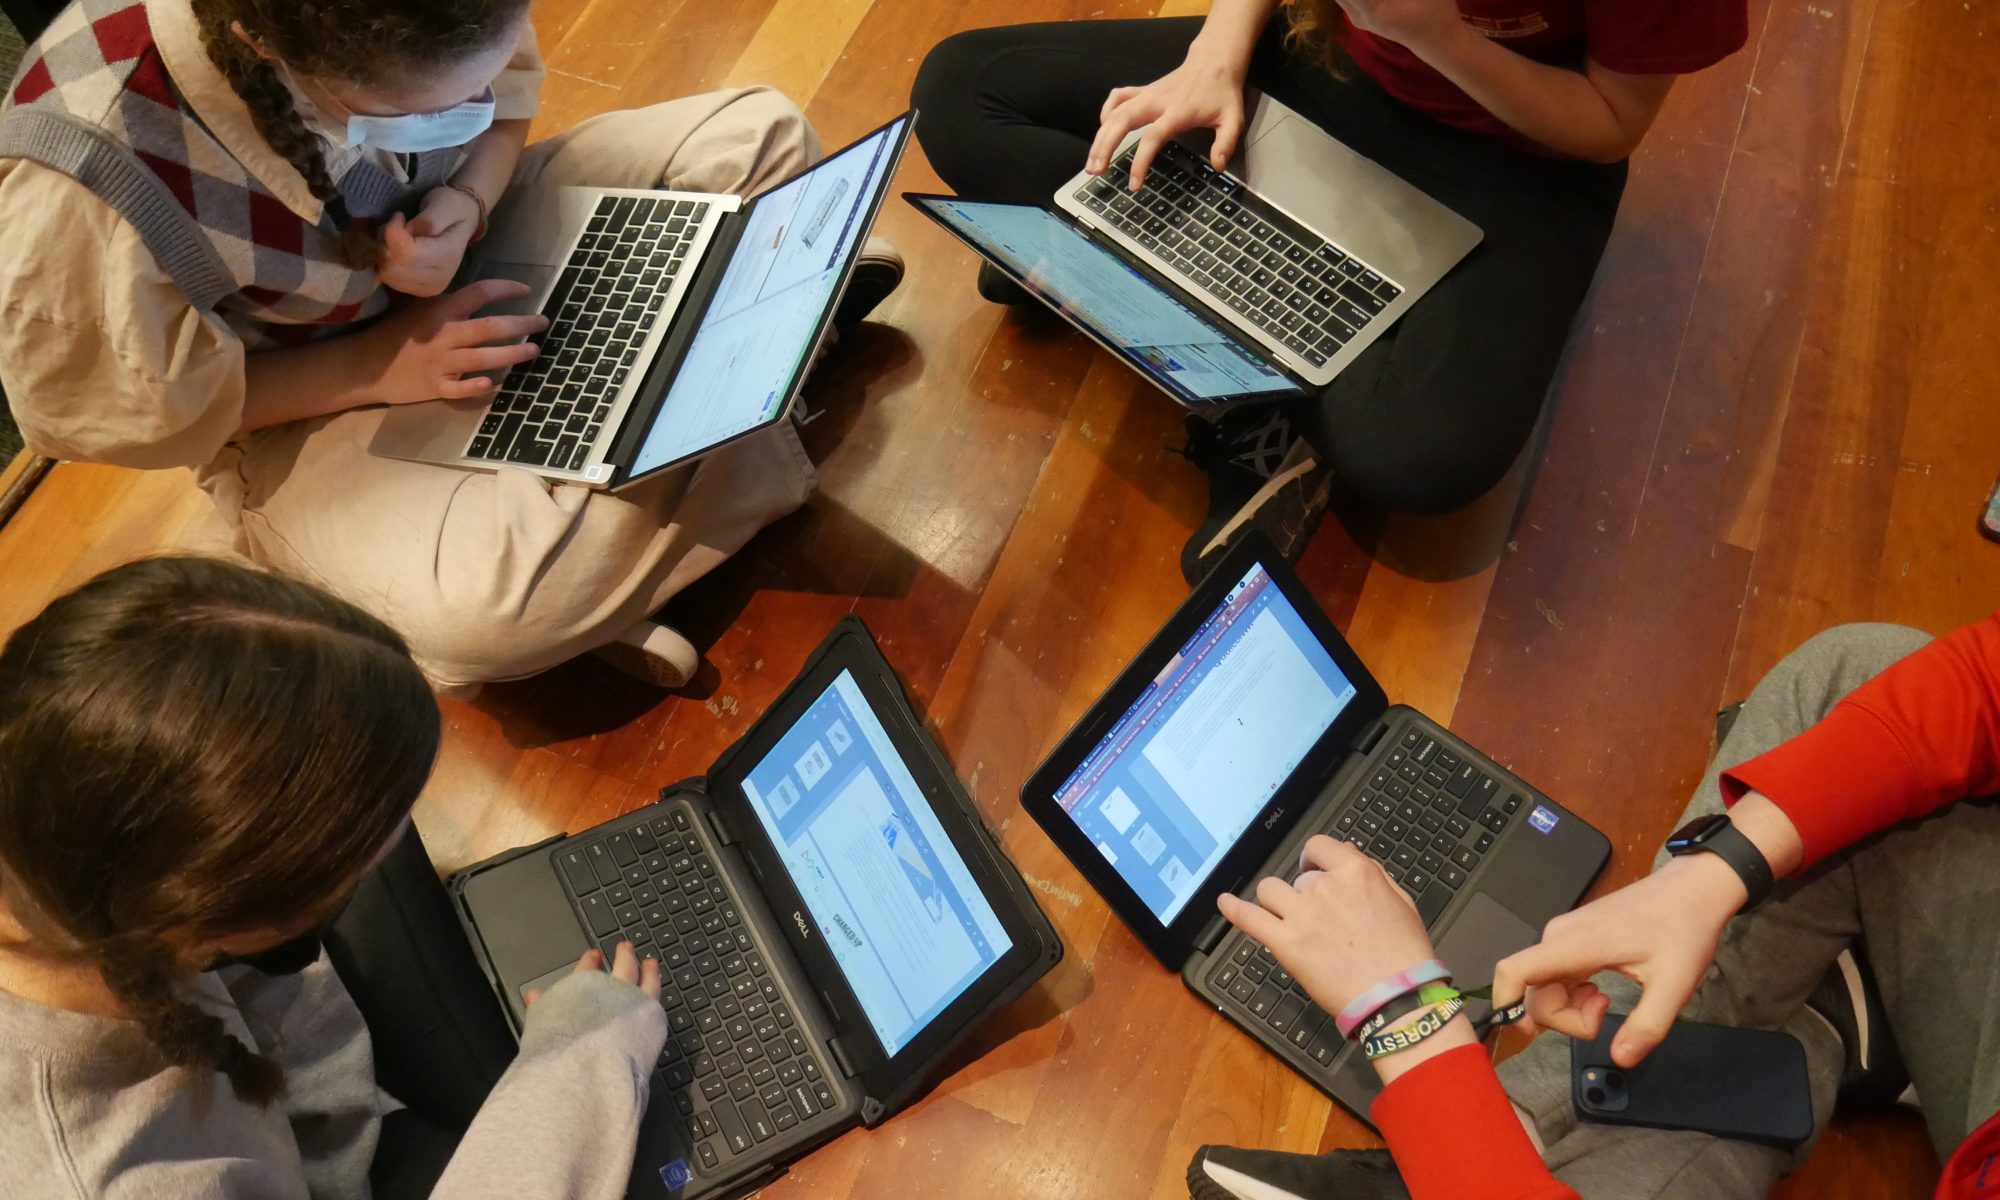 An overhead view of 4 students sitting in a circle with open laptops